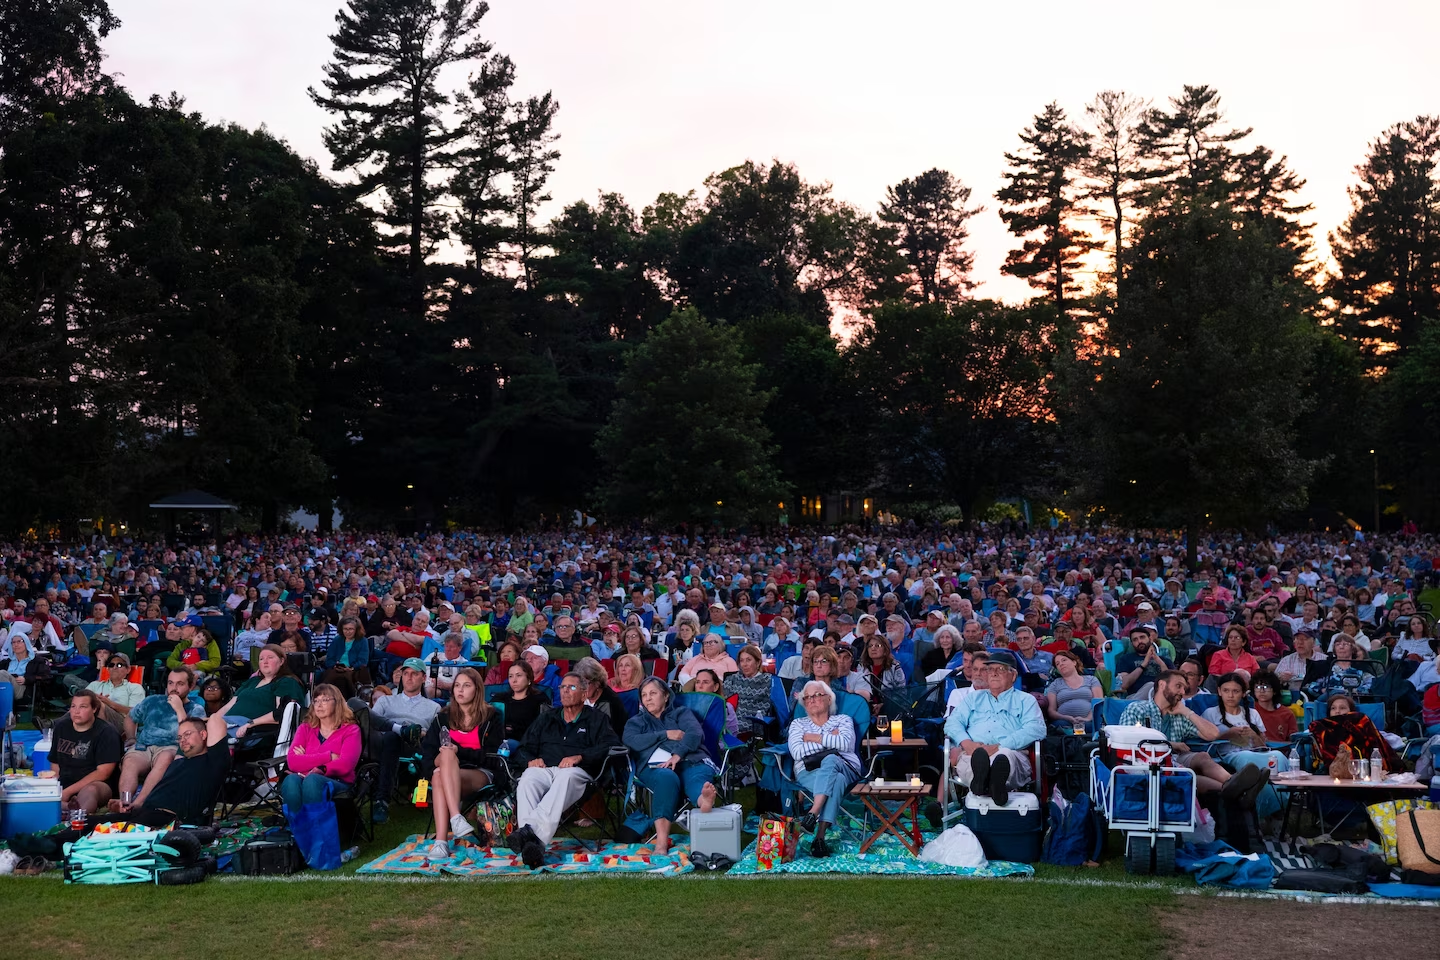 A crowd on blankets and folding chairs assembles on the lawn of Tanglewood.